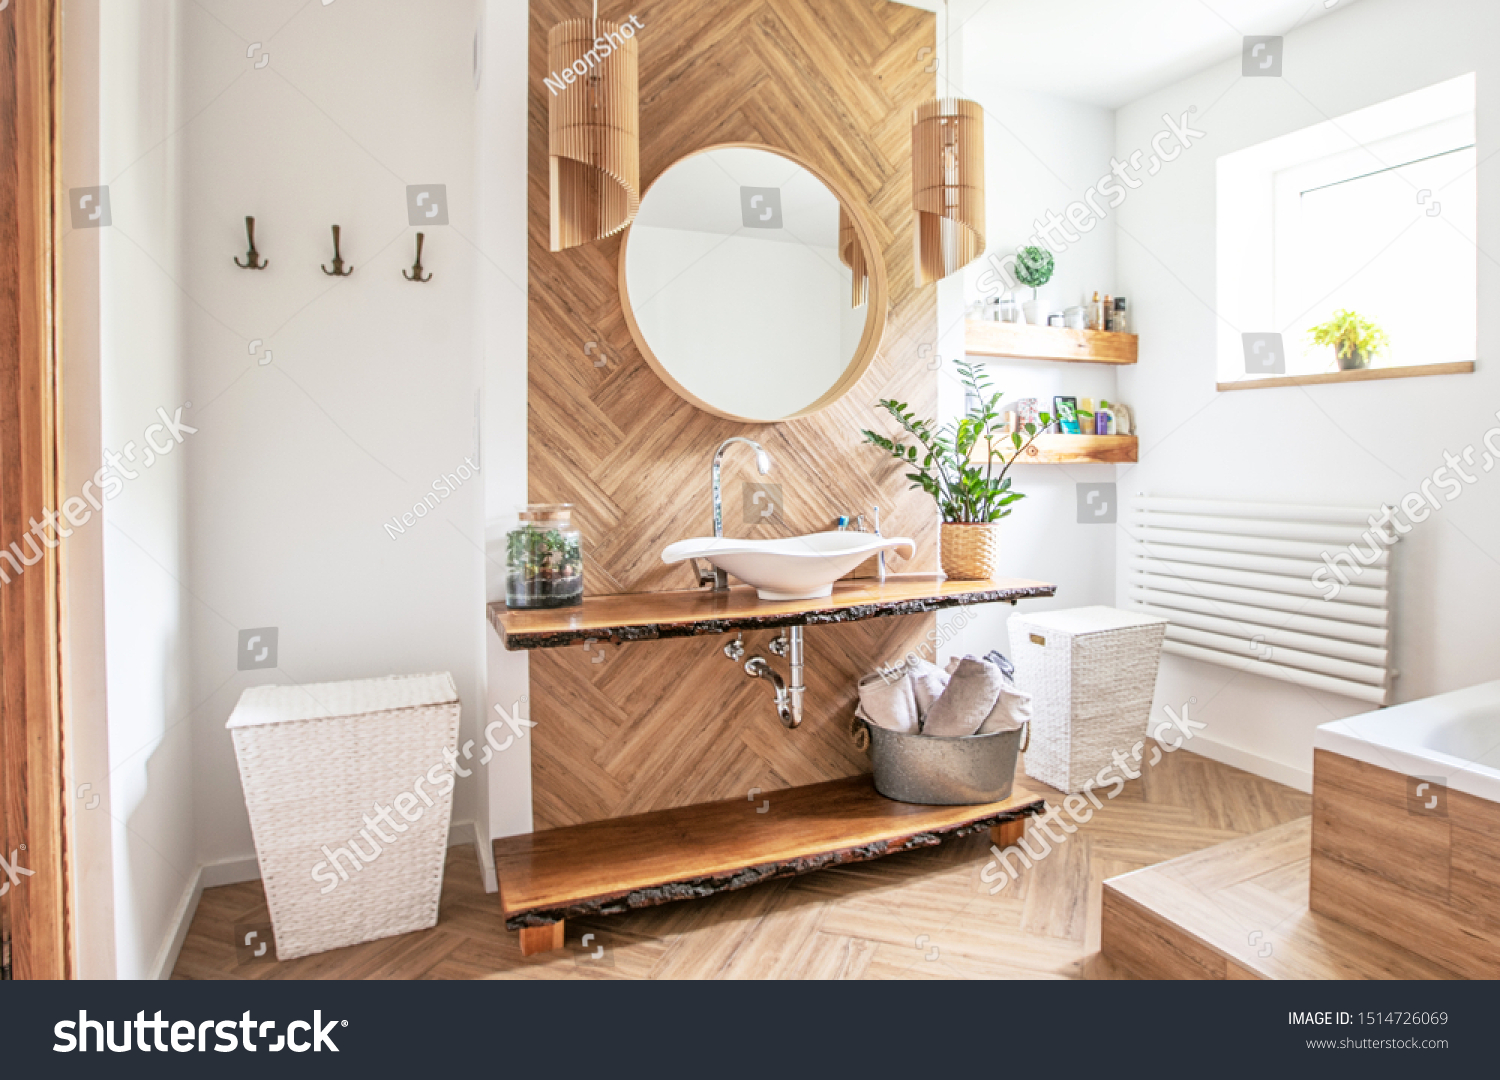 White sink on wood counter with a round mirror hanging above it. Bathroom interior. #1514726069